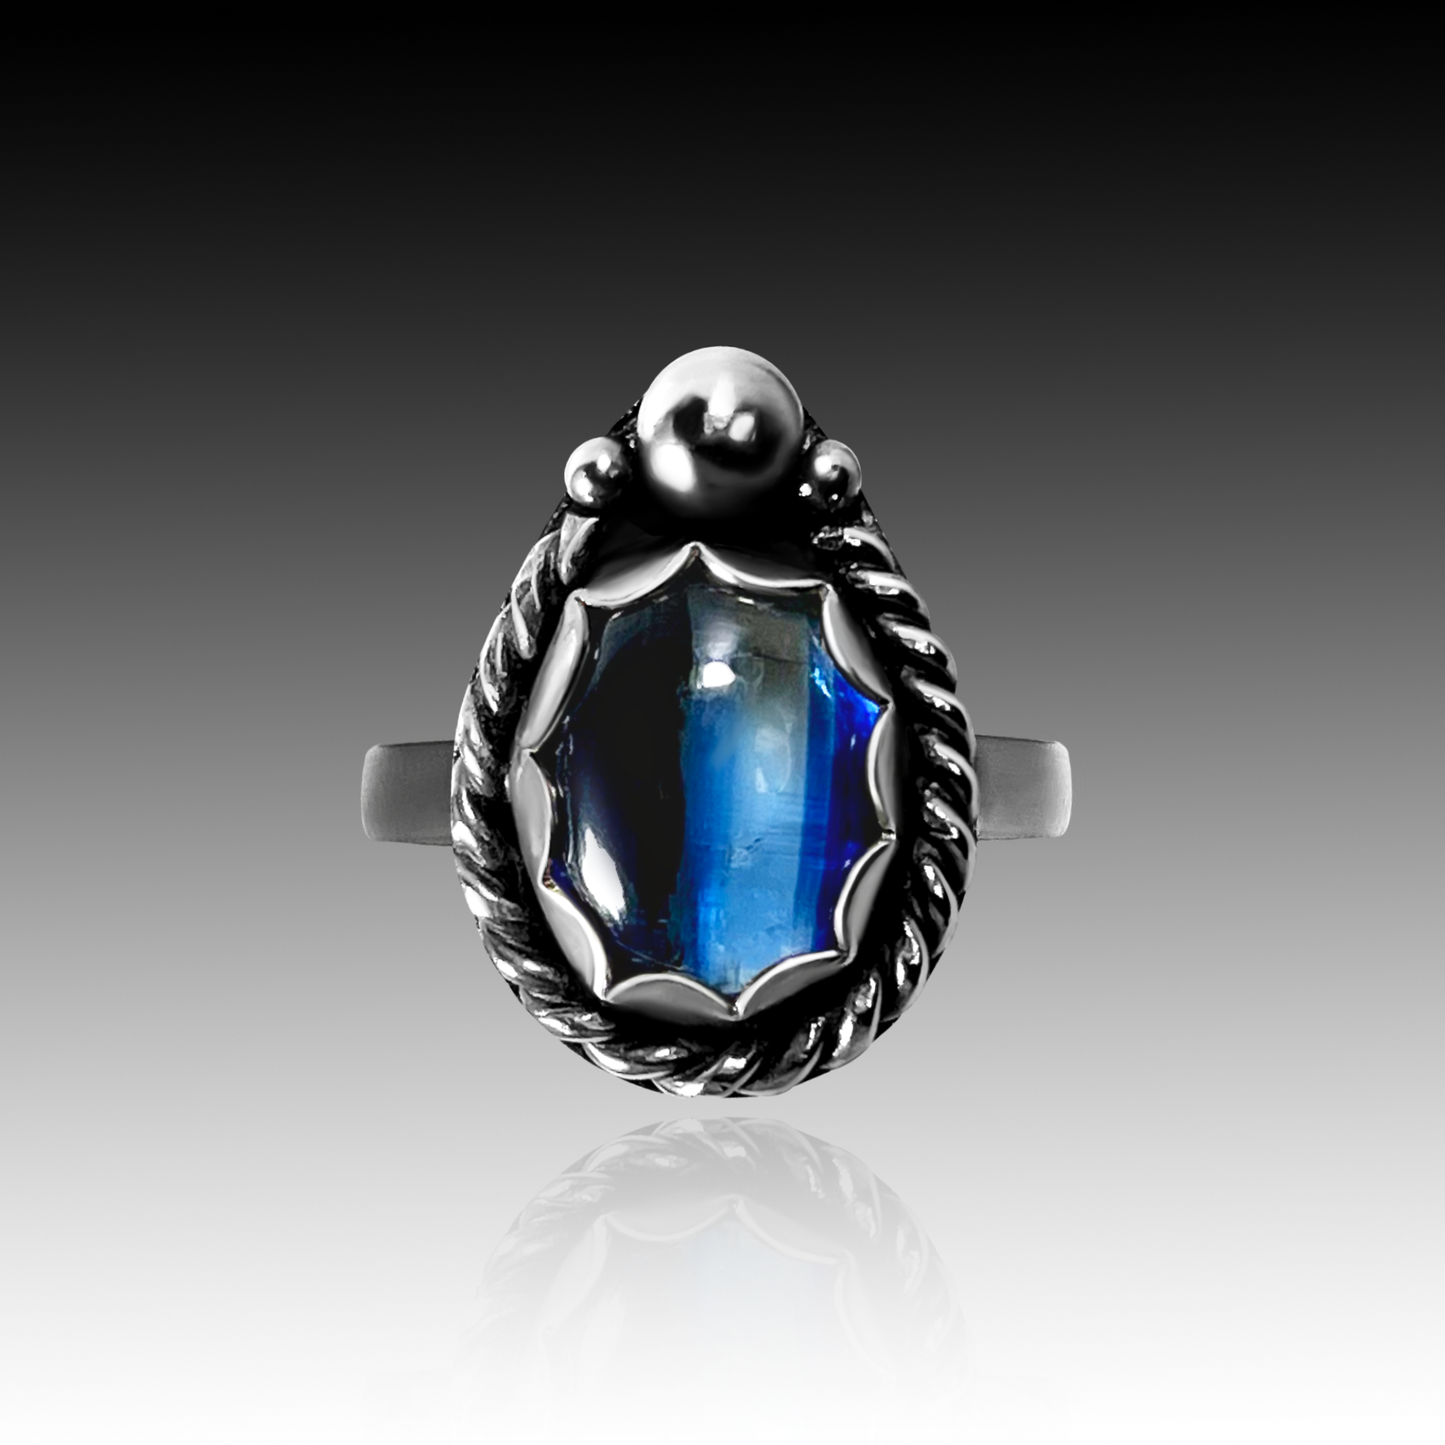 "Pthalo" Kyanite and Sterling Silver Ring